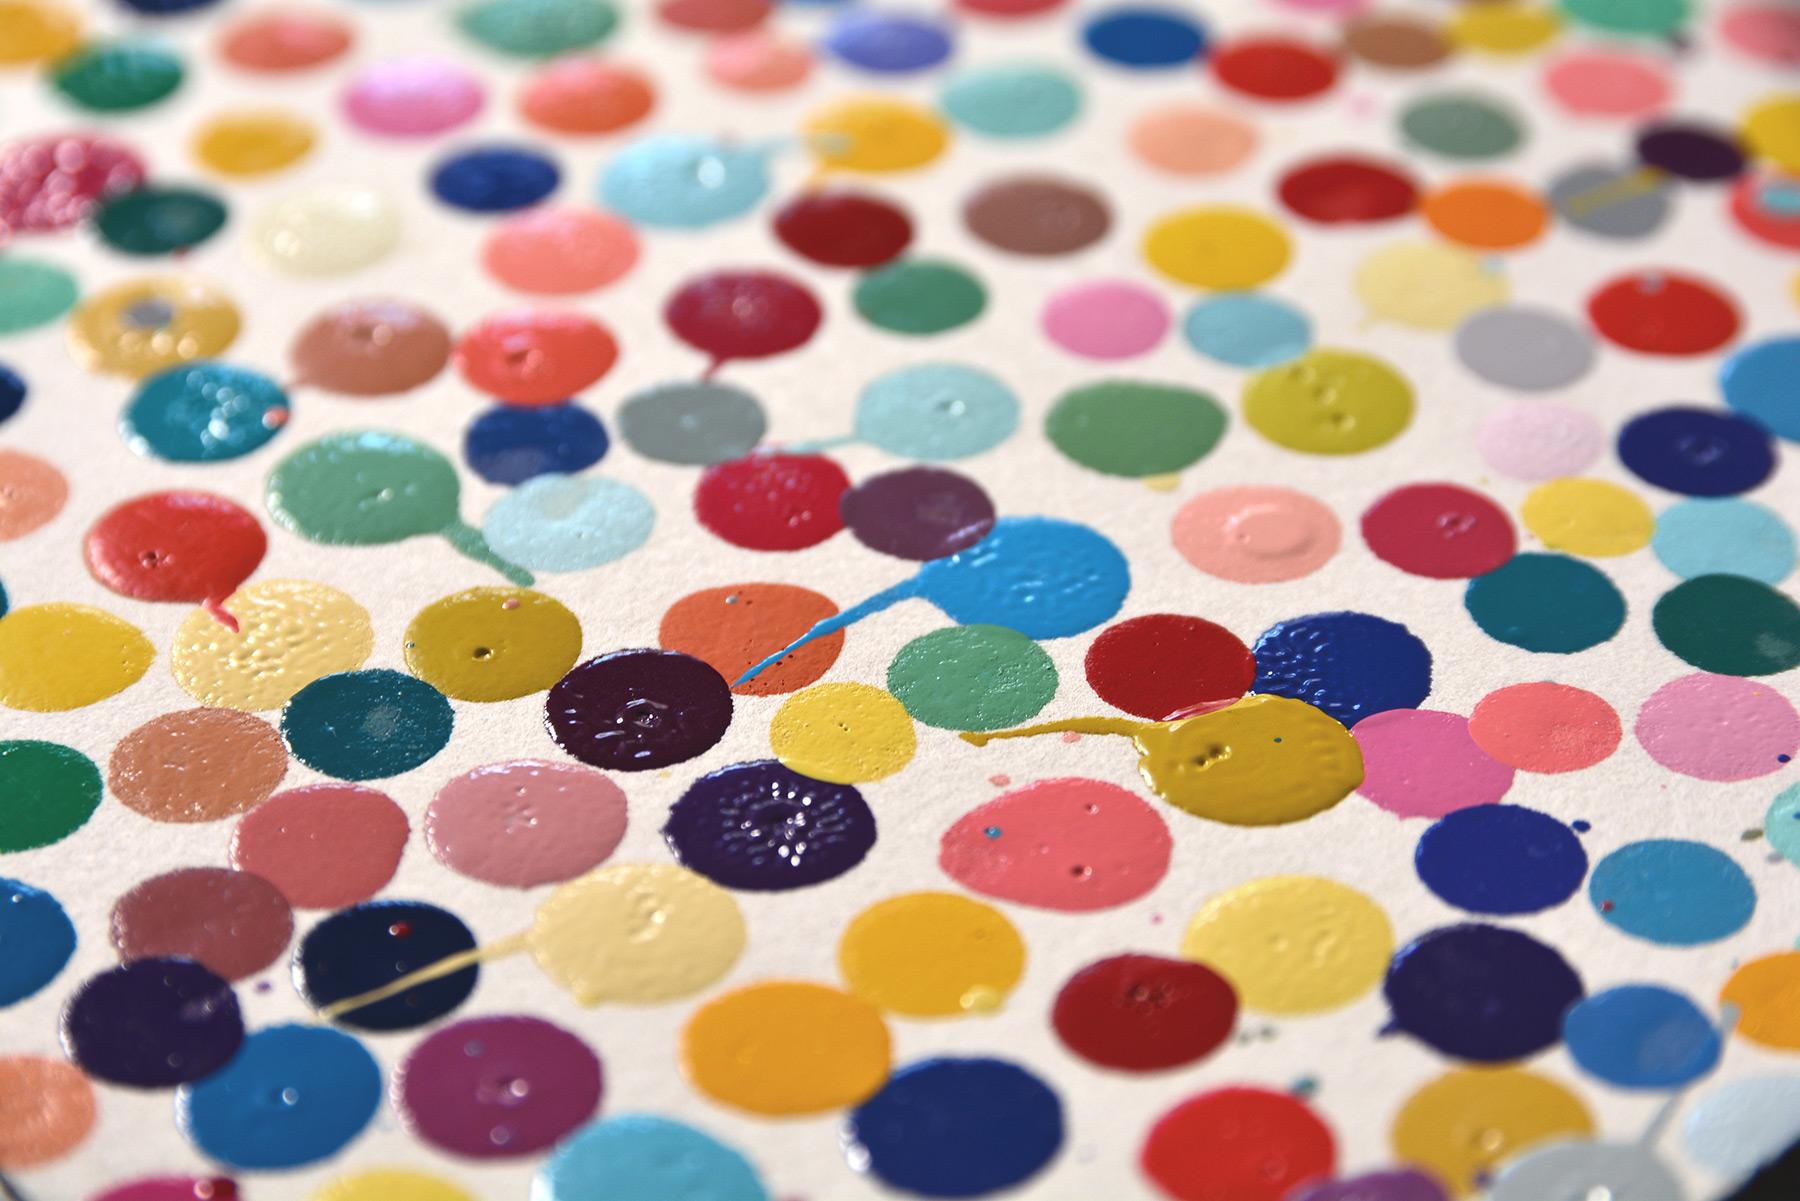 DAMIEN HIRST - THE CURRENCY. Original work The Currency Project. Dots. Colors - Beige Abstract Painting by Damien Hirst